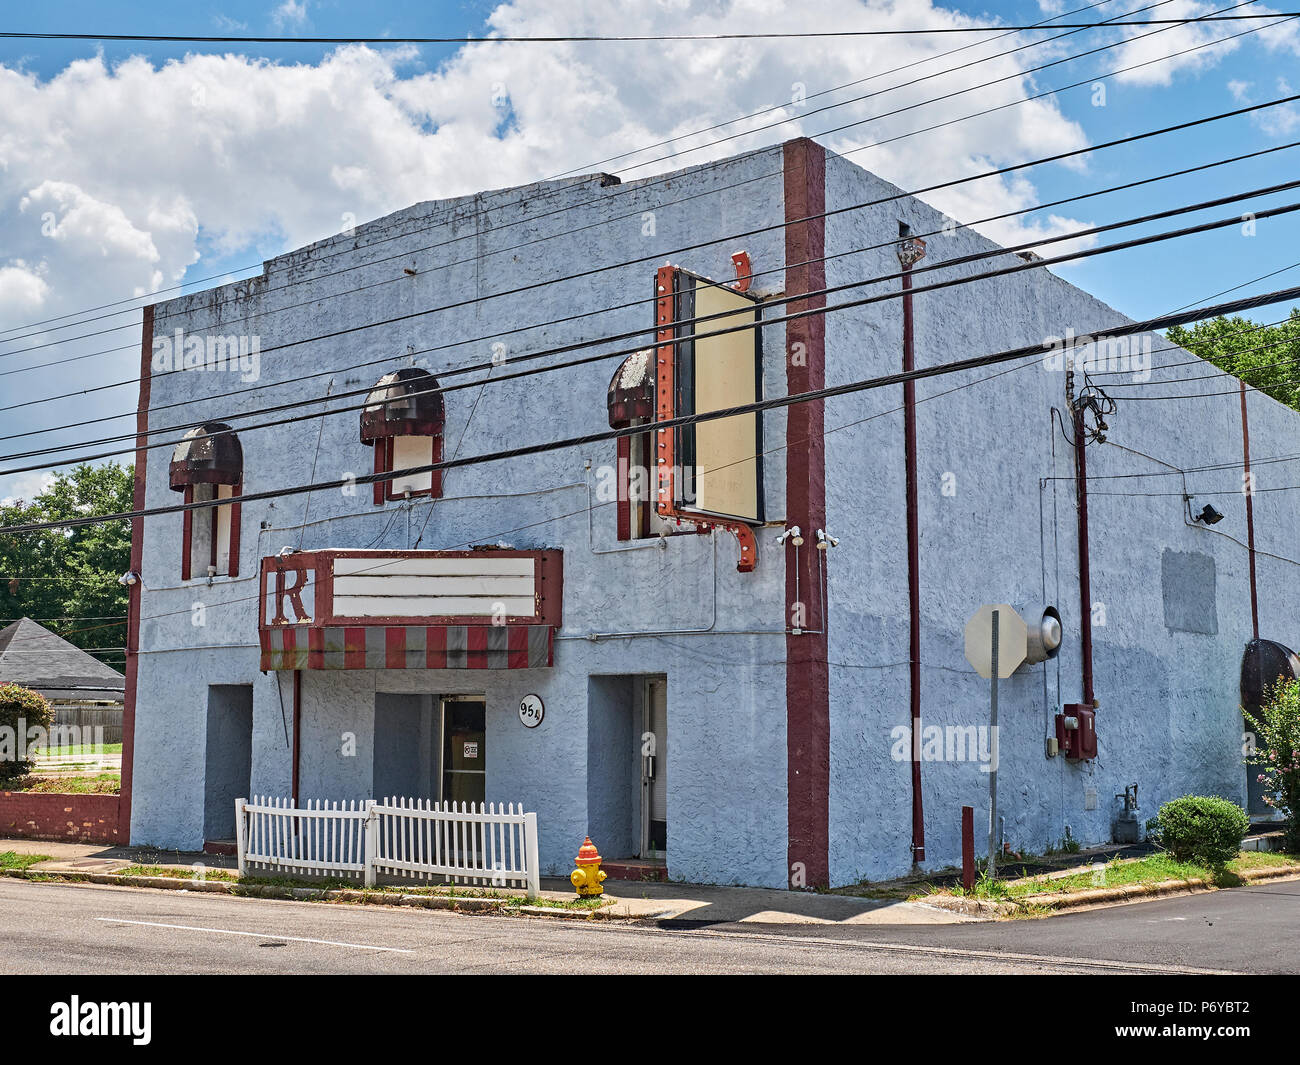 Vintage abandoned old movie theater in run down condition in Montgomery Alabama, USA. Stock Photo